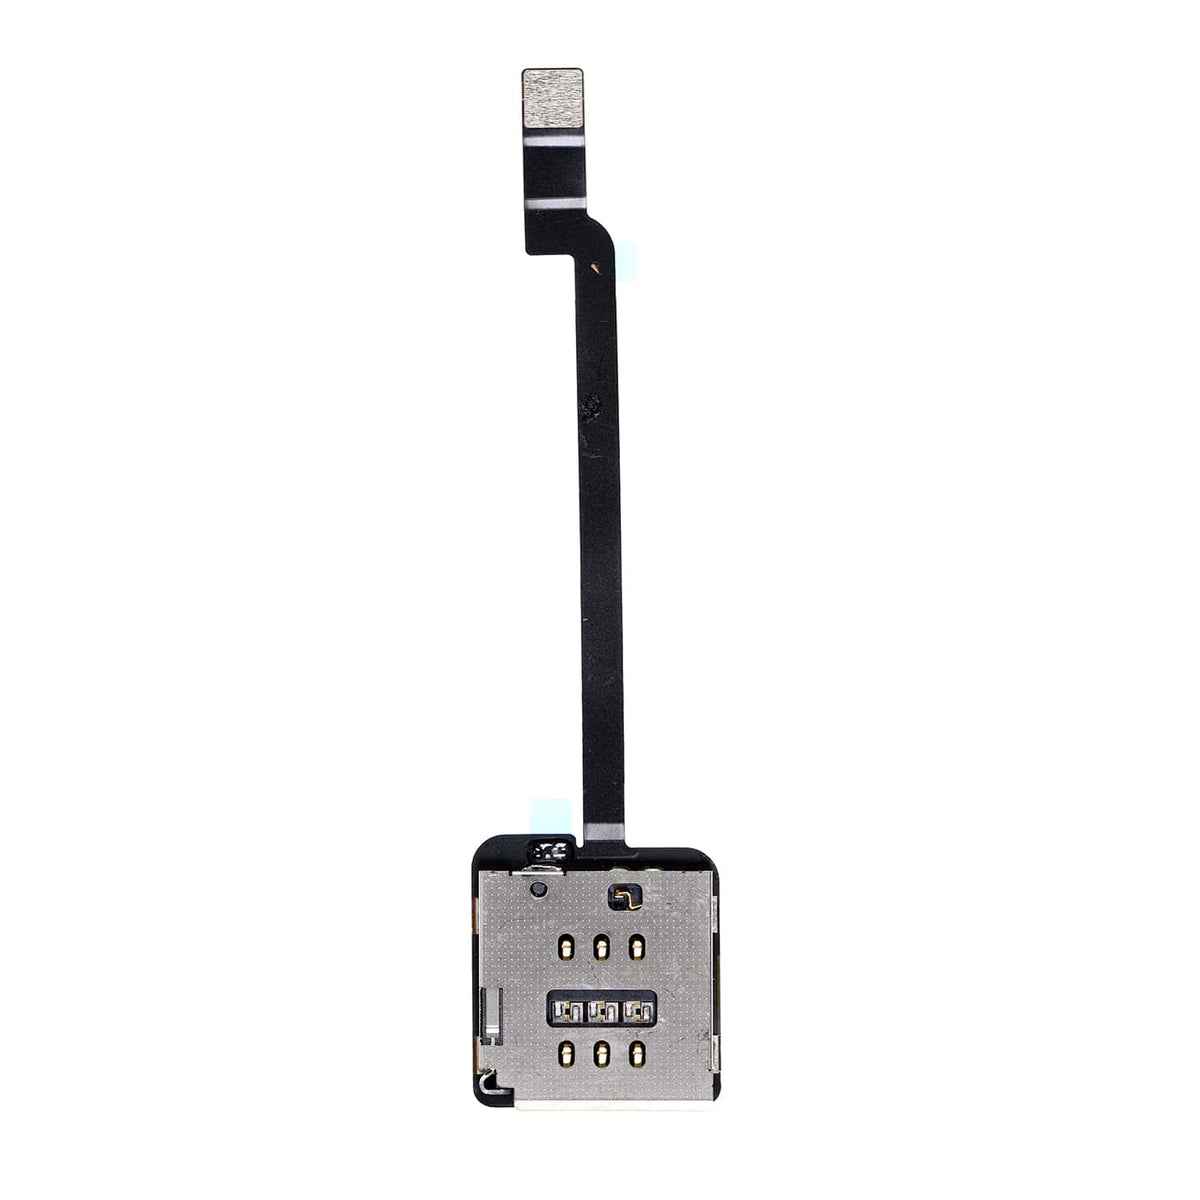 SIM CARD SLOT WITH FLEX CABLE FOR IPAD PRO 11" 2ND GEN